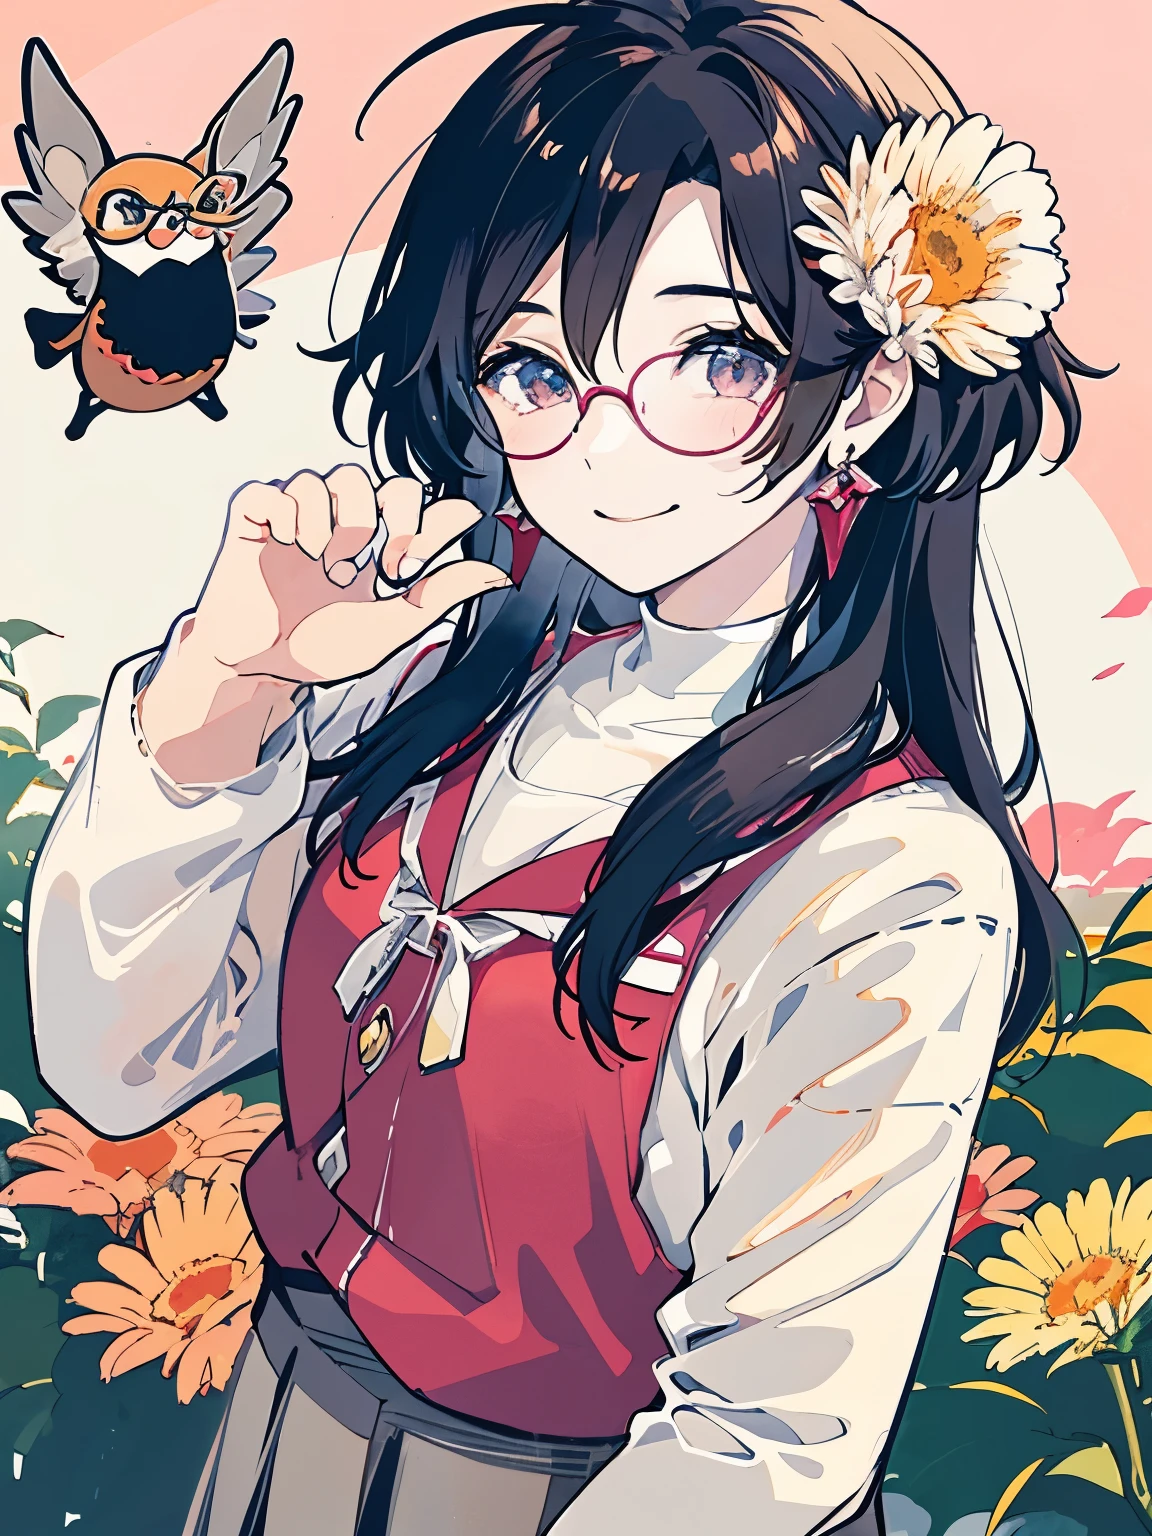 young girl、primary school student、10 year old girl、Wear glasses、orange and pink pastel colors、red earrings、A happy smile、flat chest、cute、cute女の子、watercolor painting、Illustration with light colors、Against the background of a bright forest、flower garden、